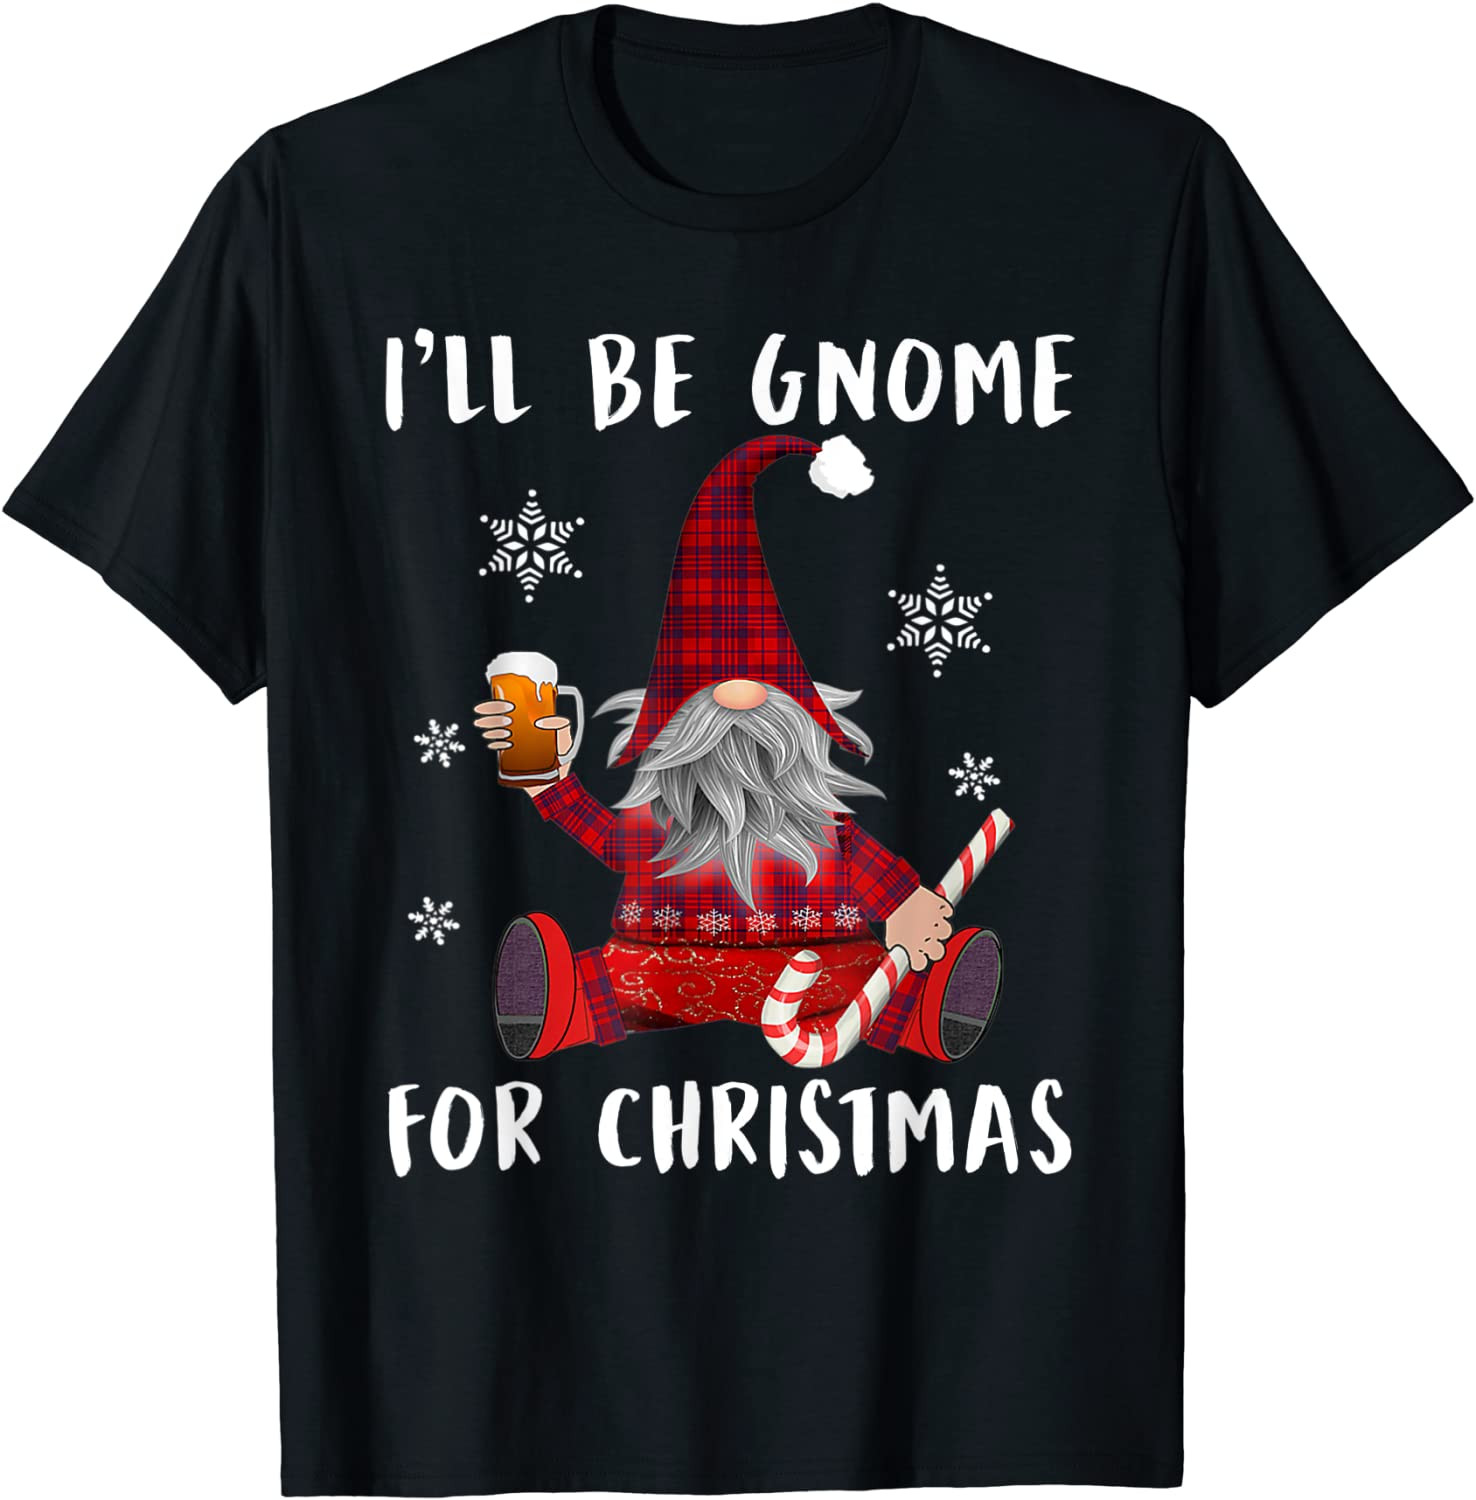 I'll Be Gnome For Christmas, Beer, By Yoray T-Shirt